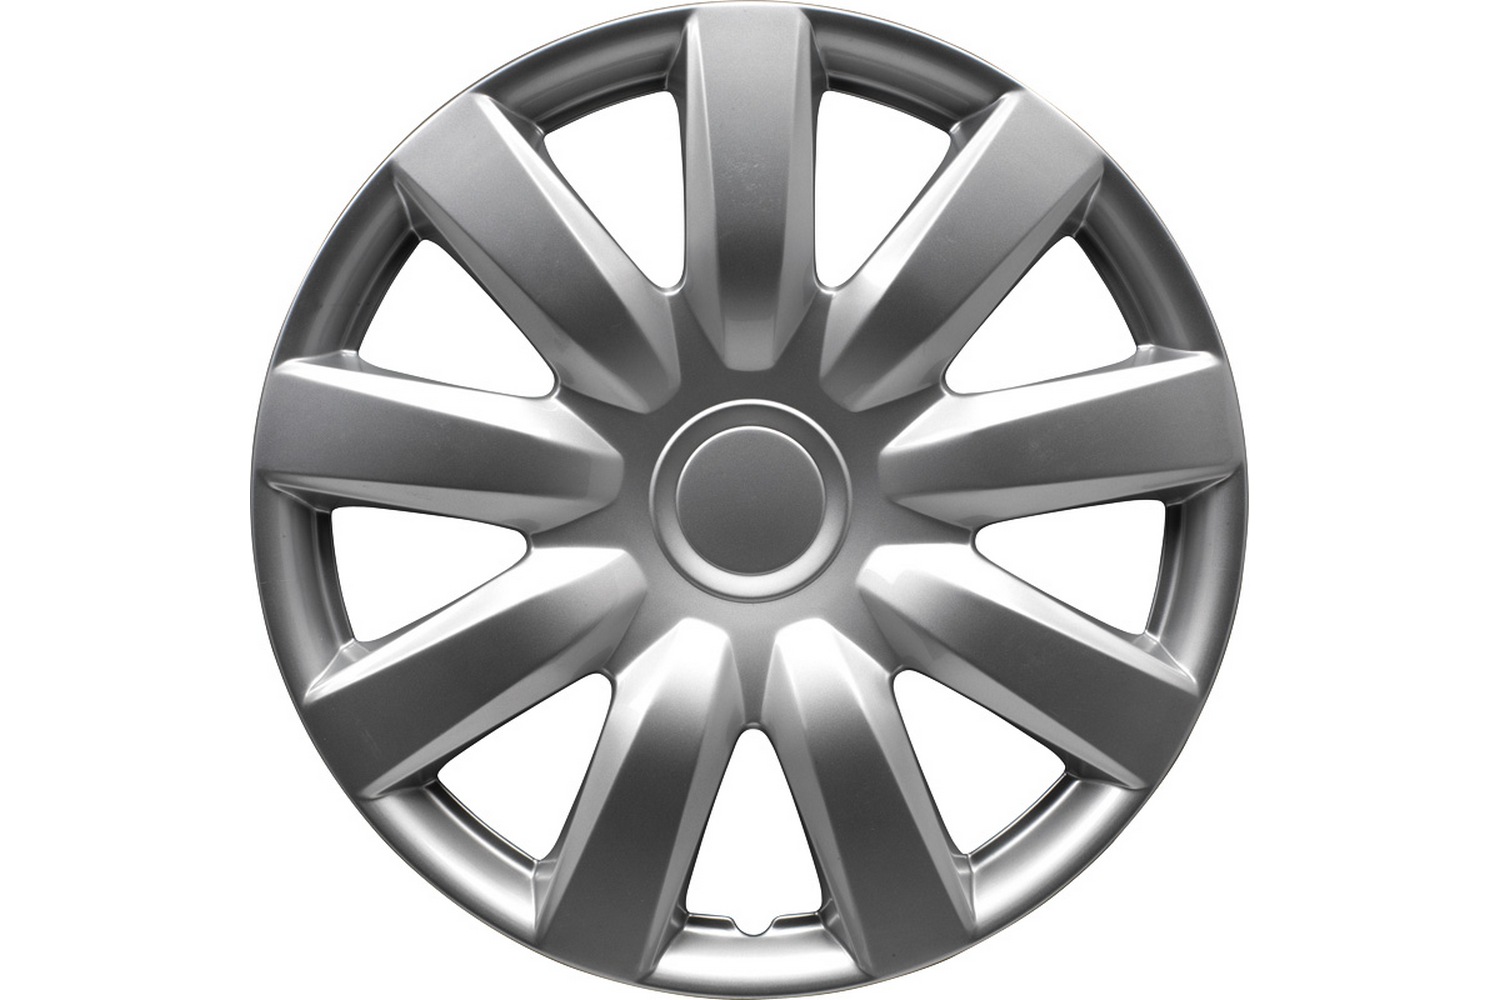 Wheel covers Alabama 15 inch set 4 pieces